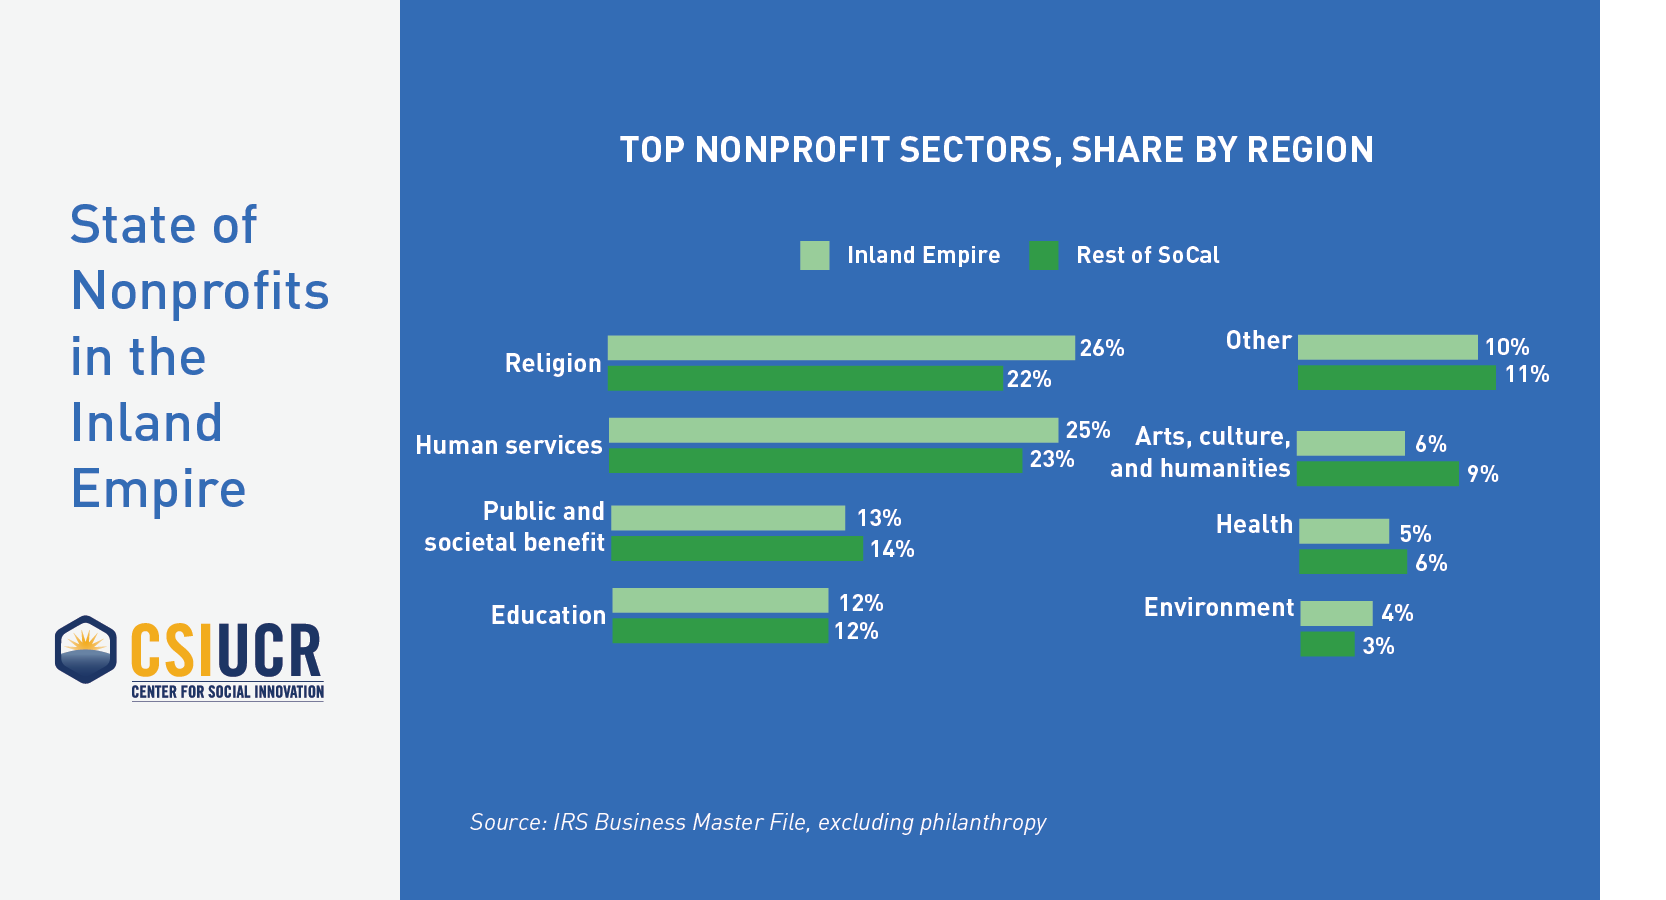 Top Nonprofit Sectors, Share By Region